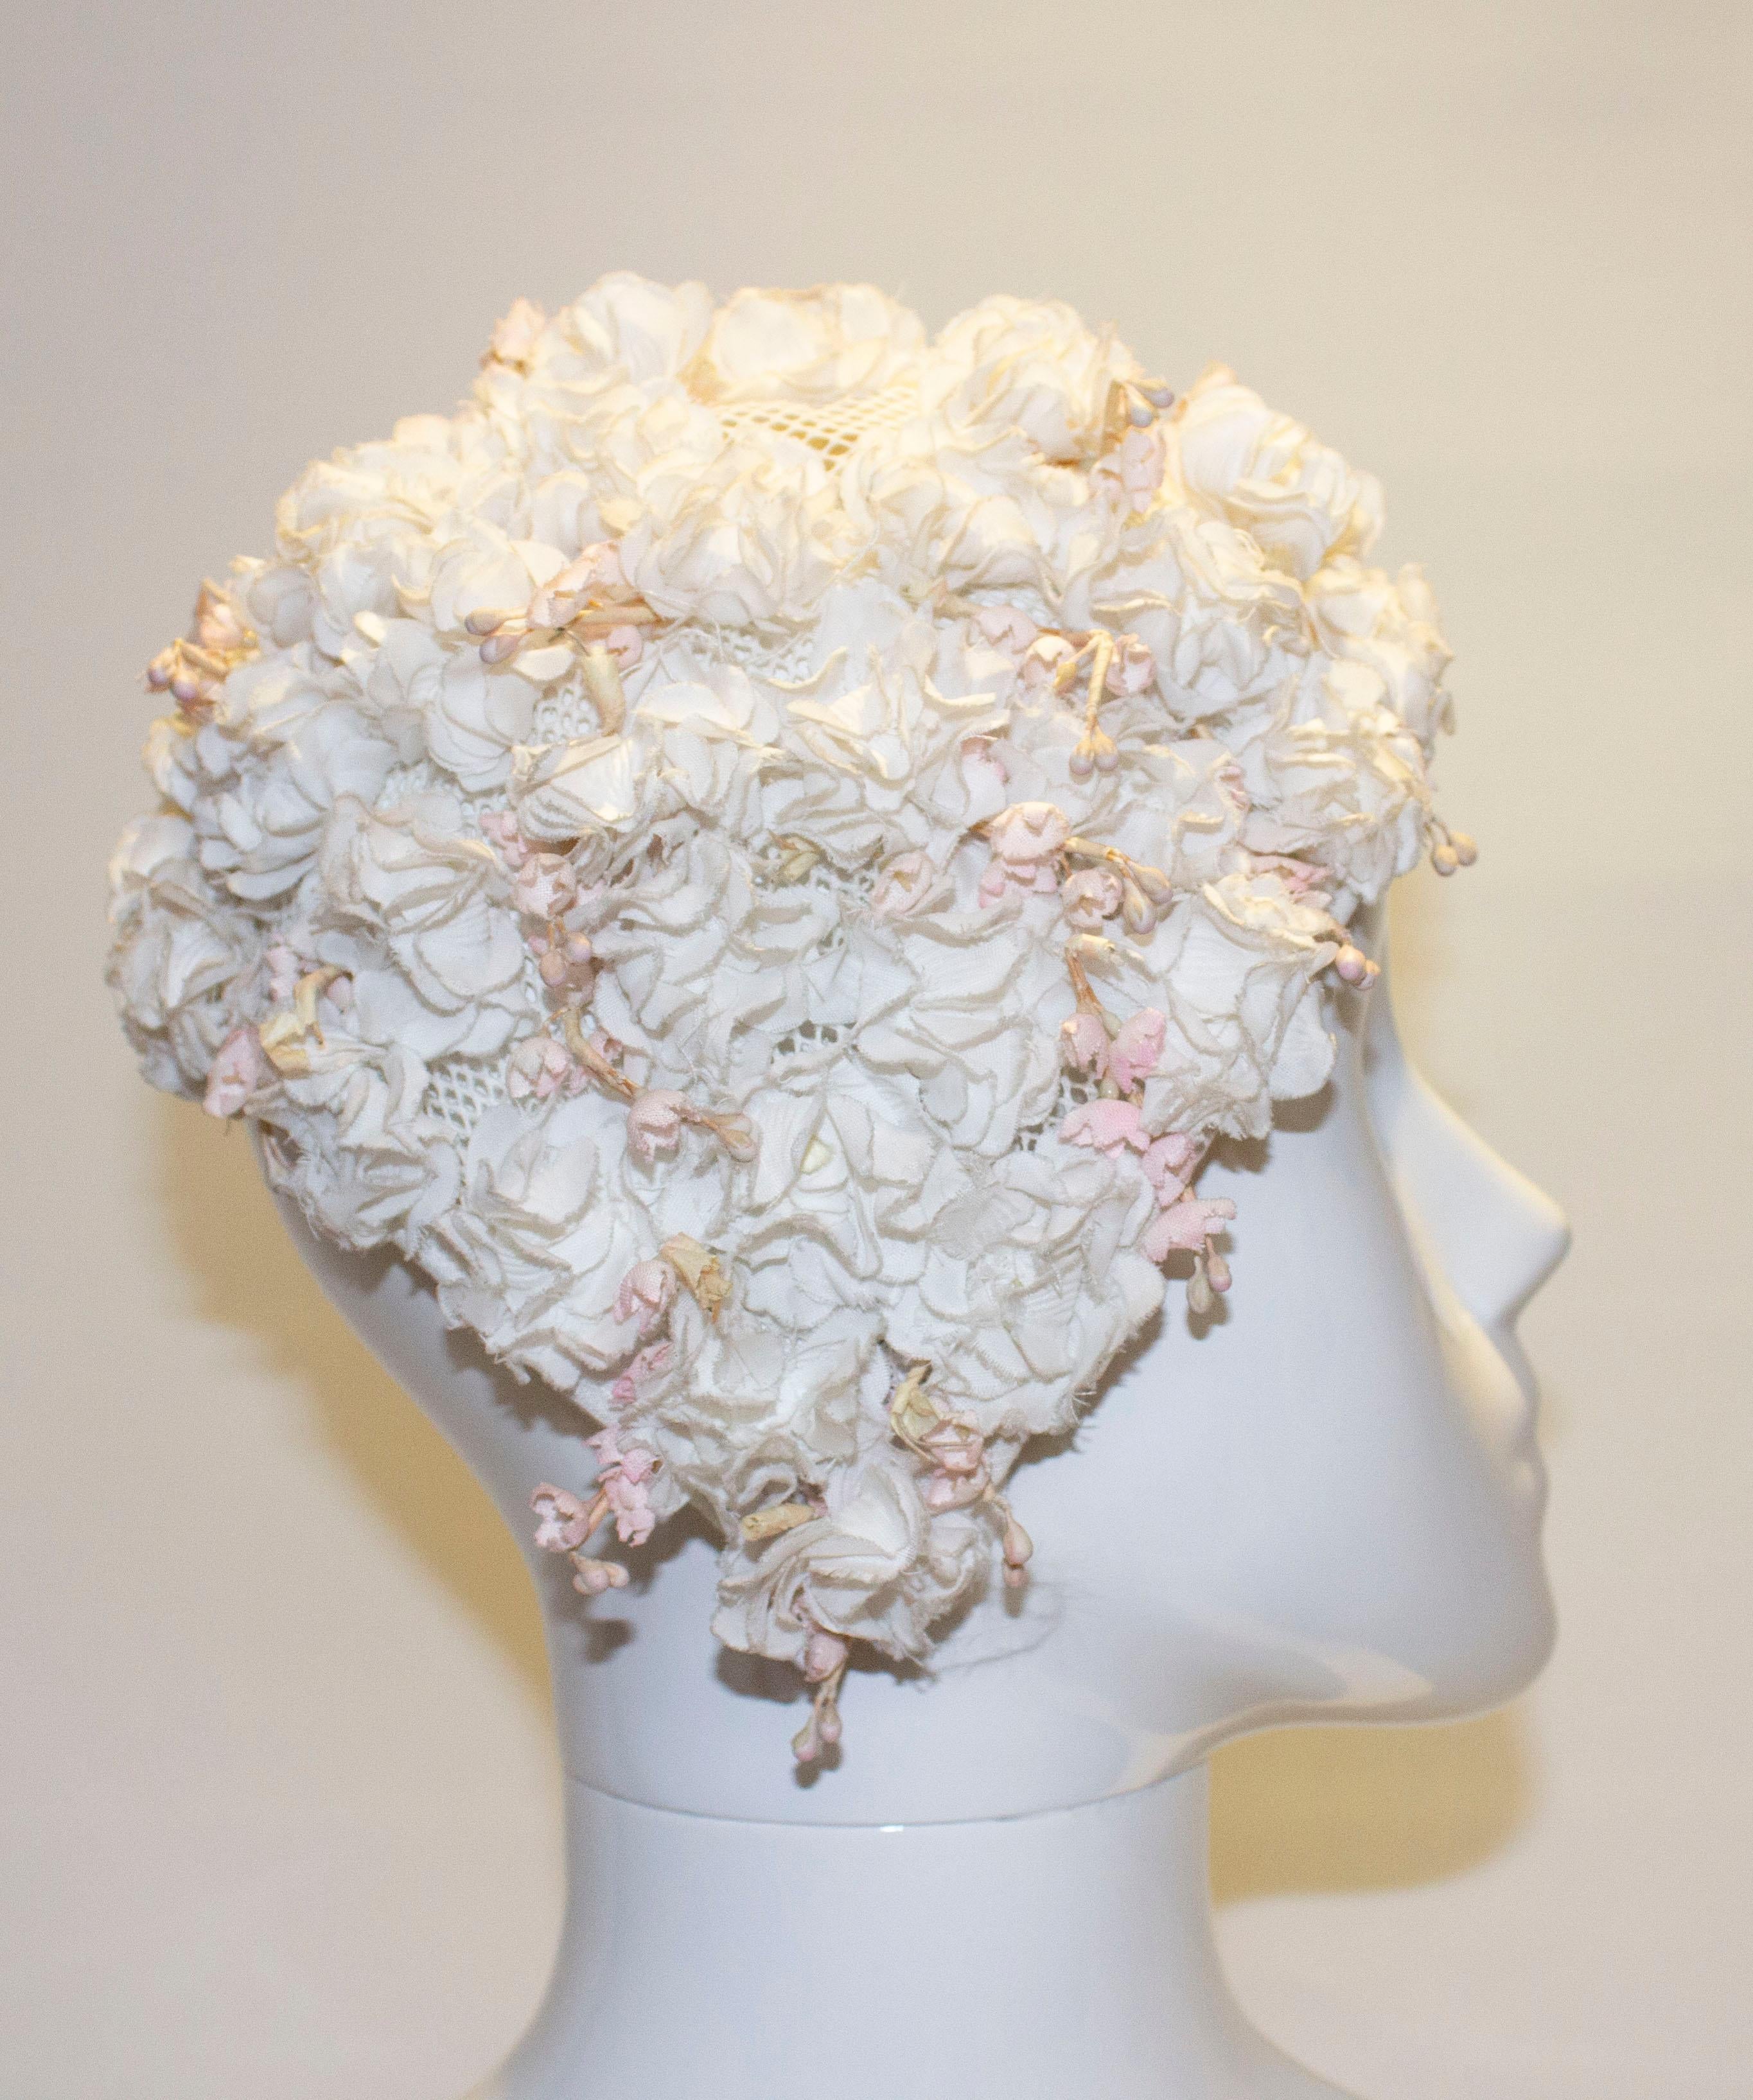 A fun vintage hat ,the hat is covered in white flowers and pink buds on a net frame. There are a couple of bare patches but these can be filled in.